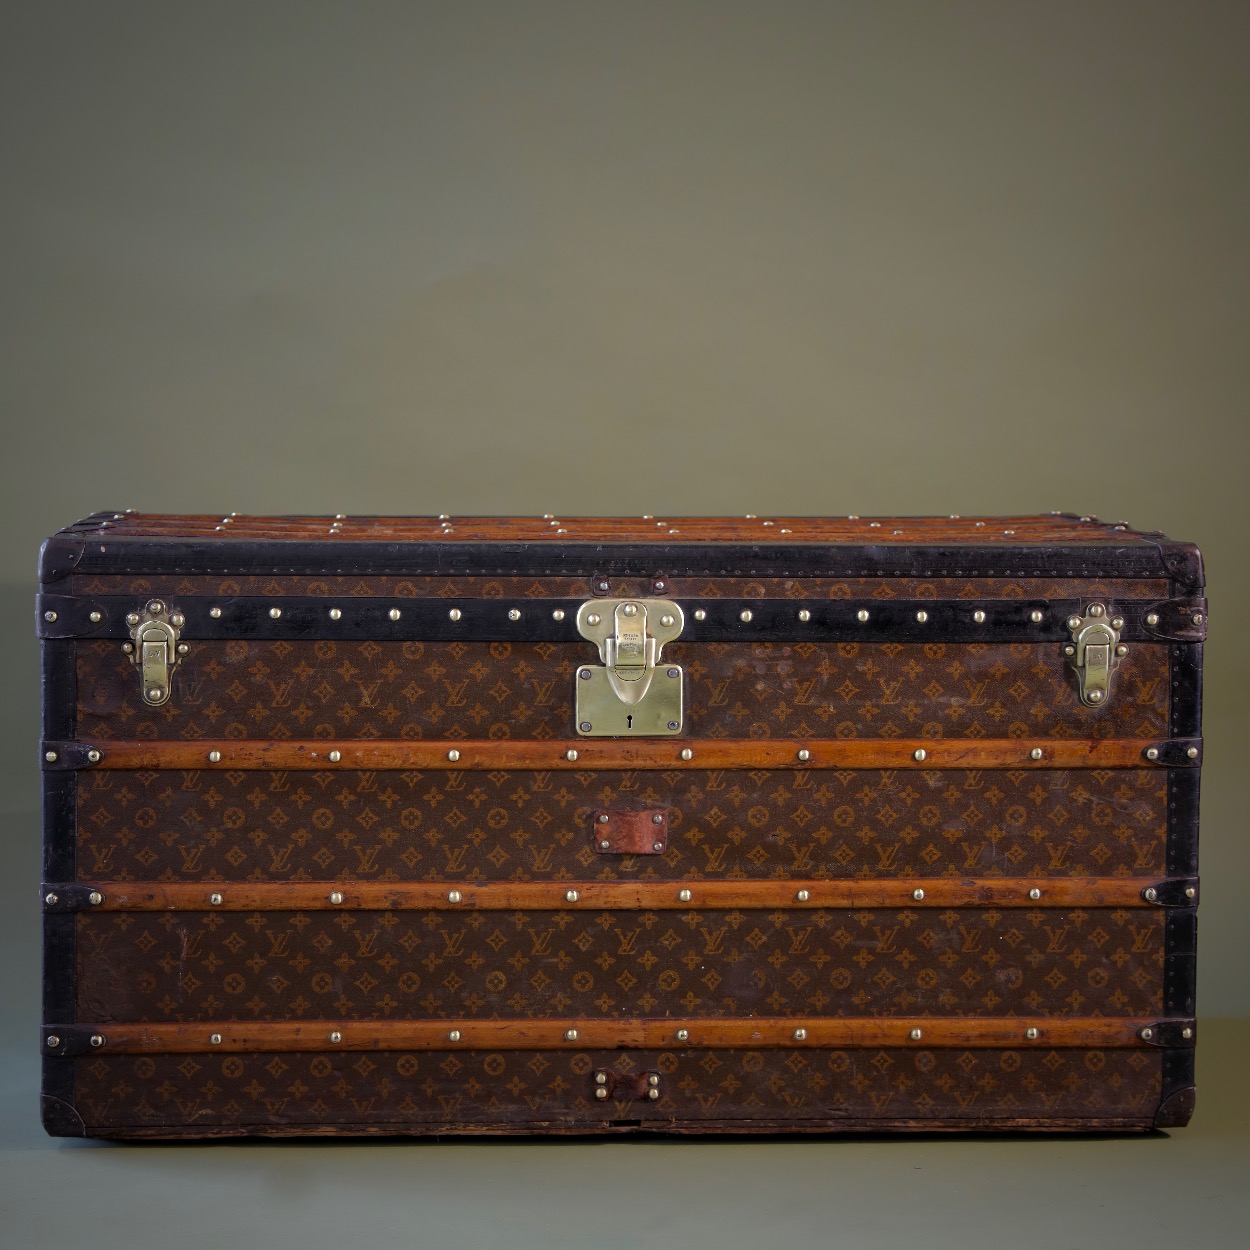 the-well-traveled-trunk-louis-vuitton-thumbnail-product-5776